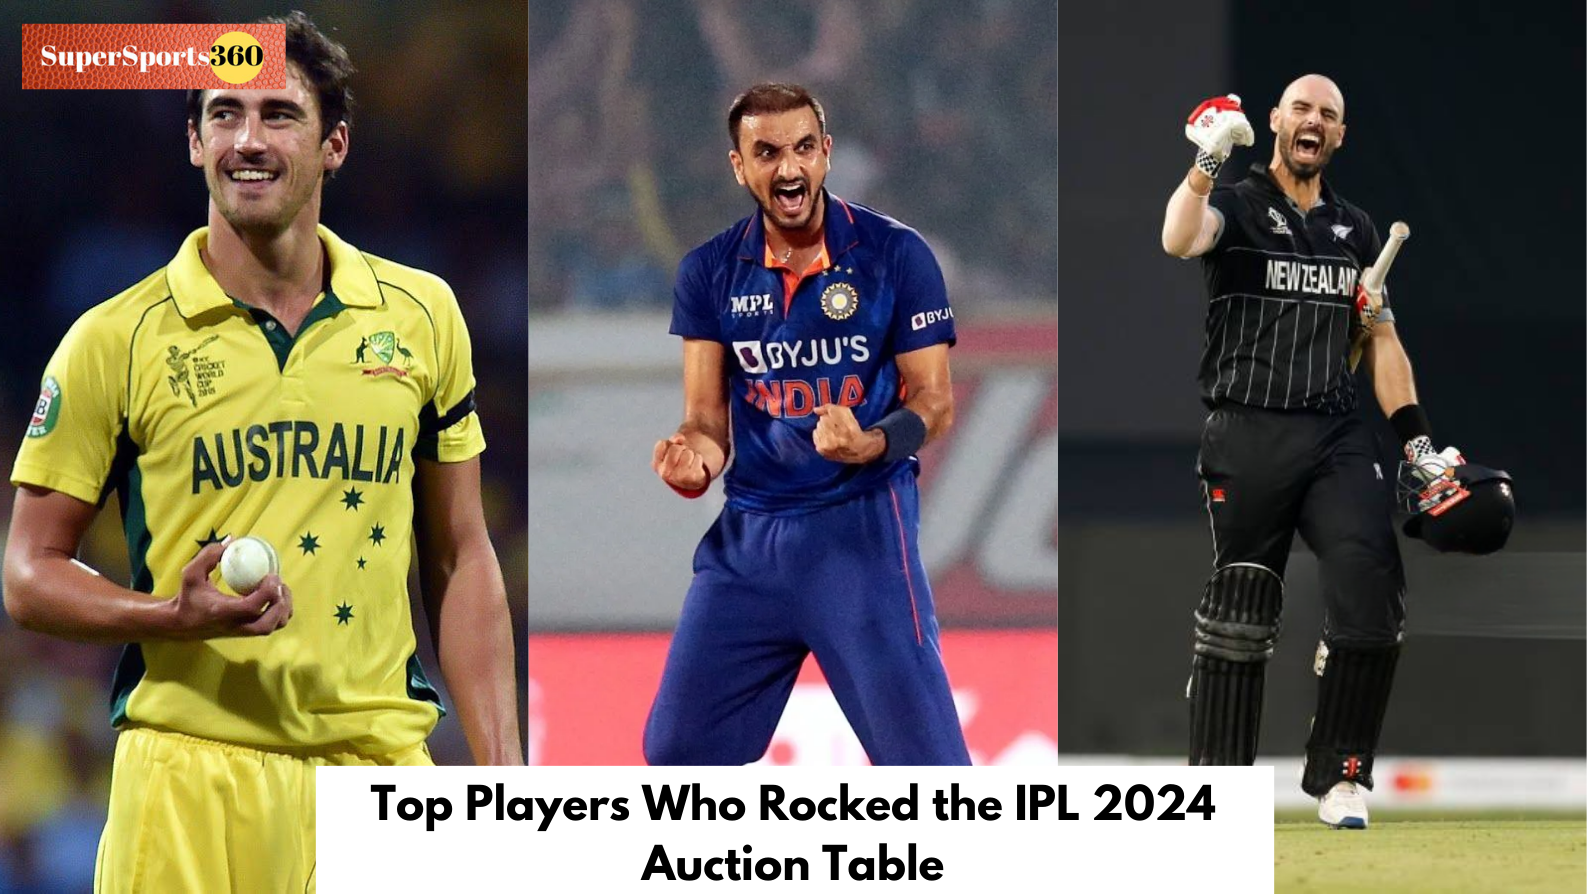 Top Players Who Rocked the IPL 2024 Auction Table